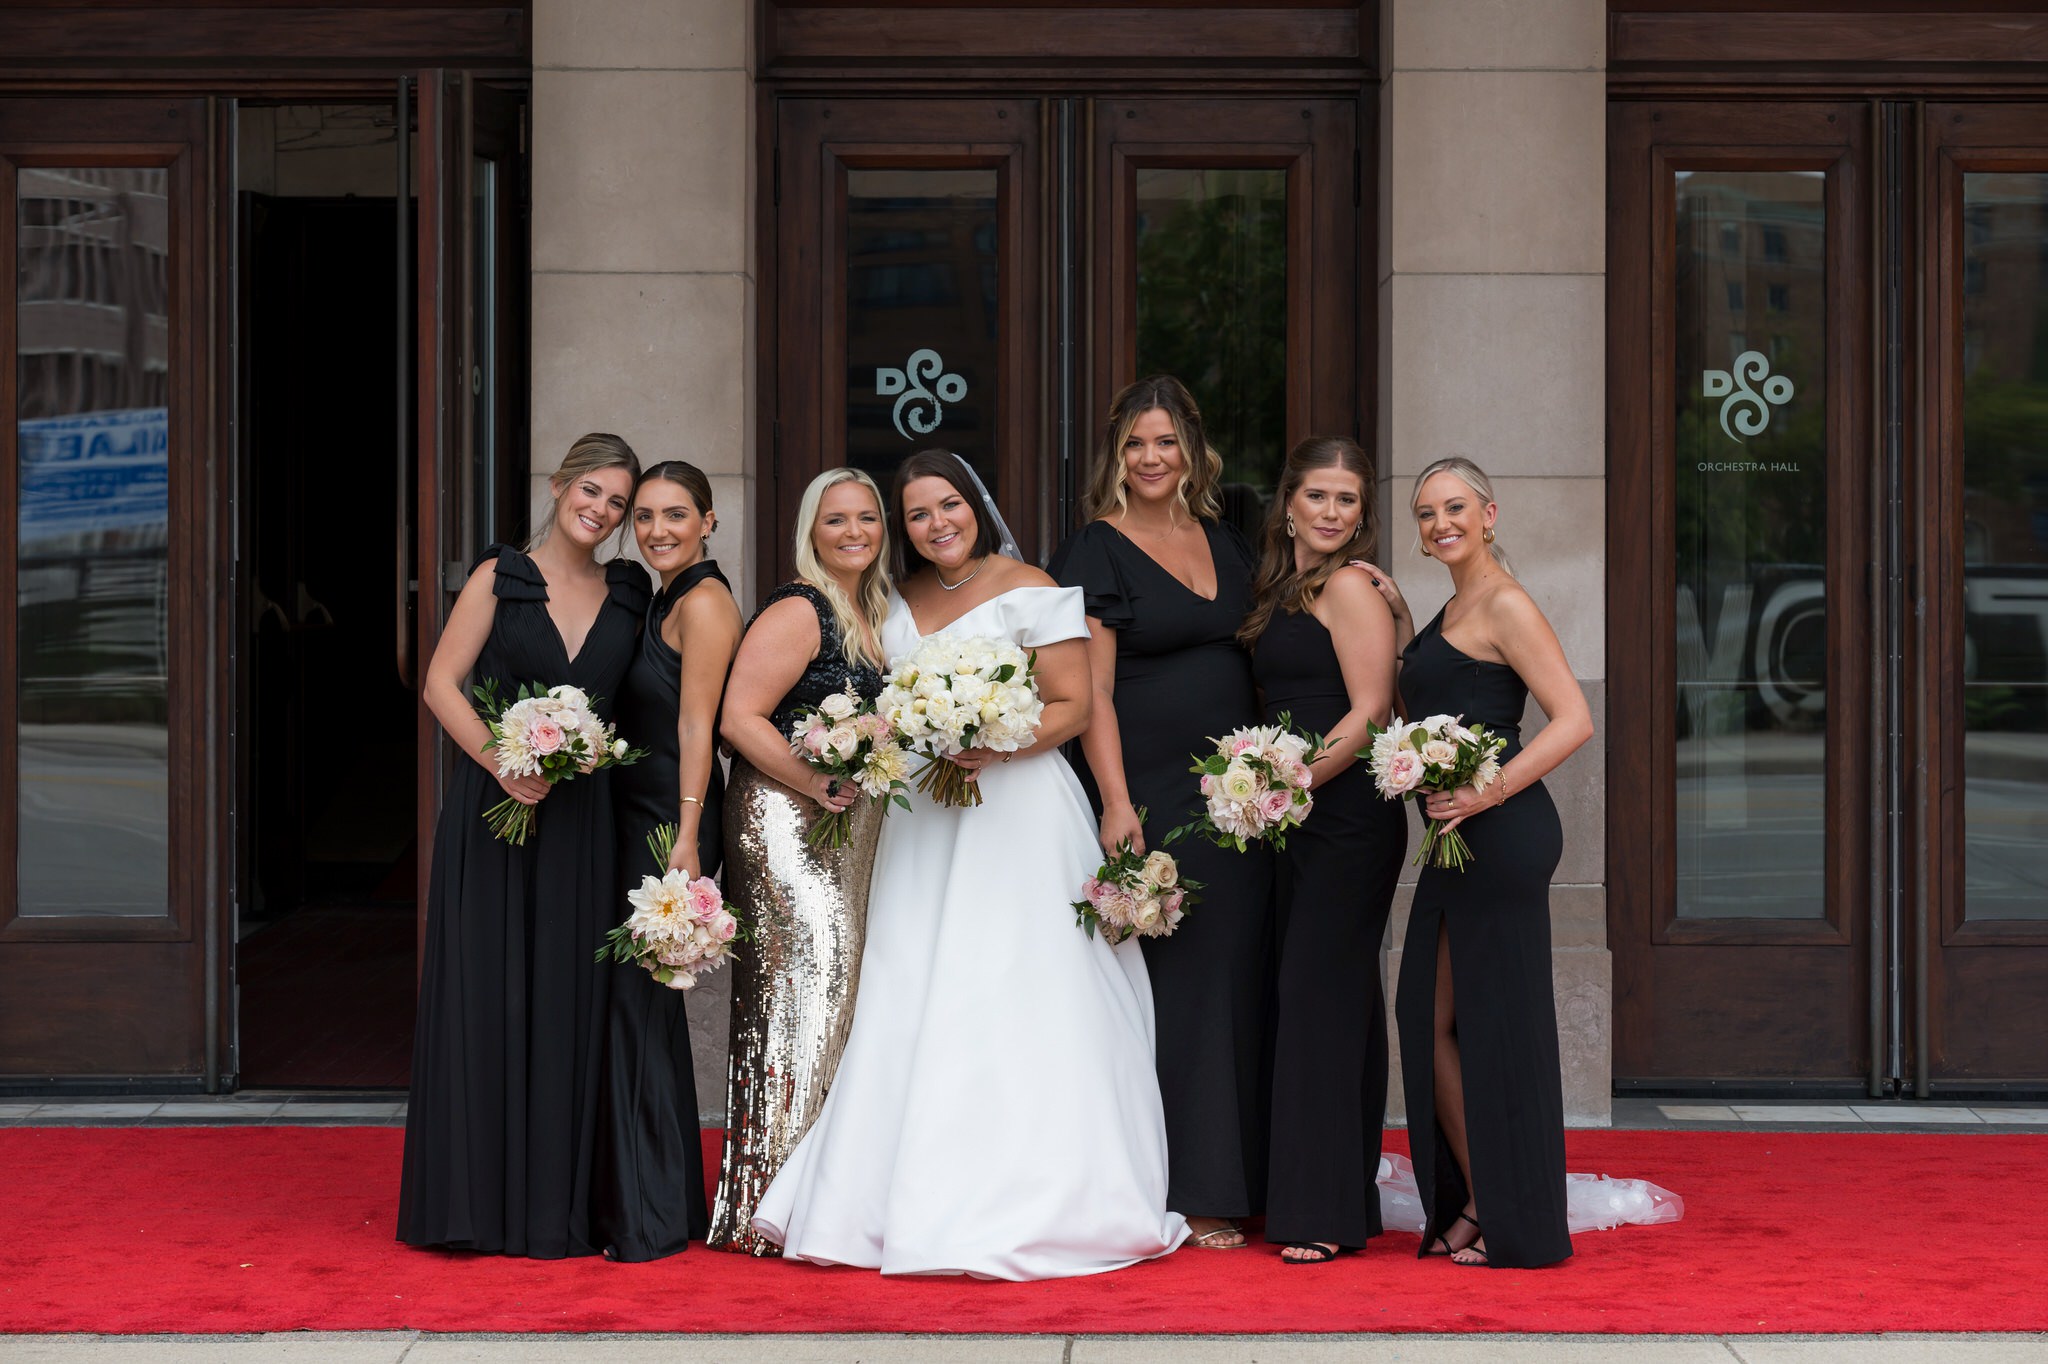 Bridesmaids pose outside the a Detroit Orchestra Hall wedding on red carpet.